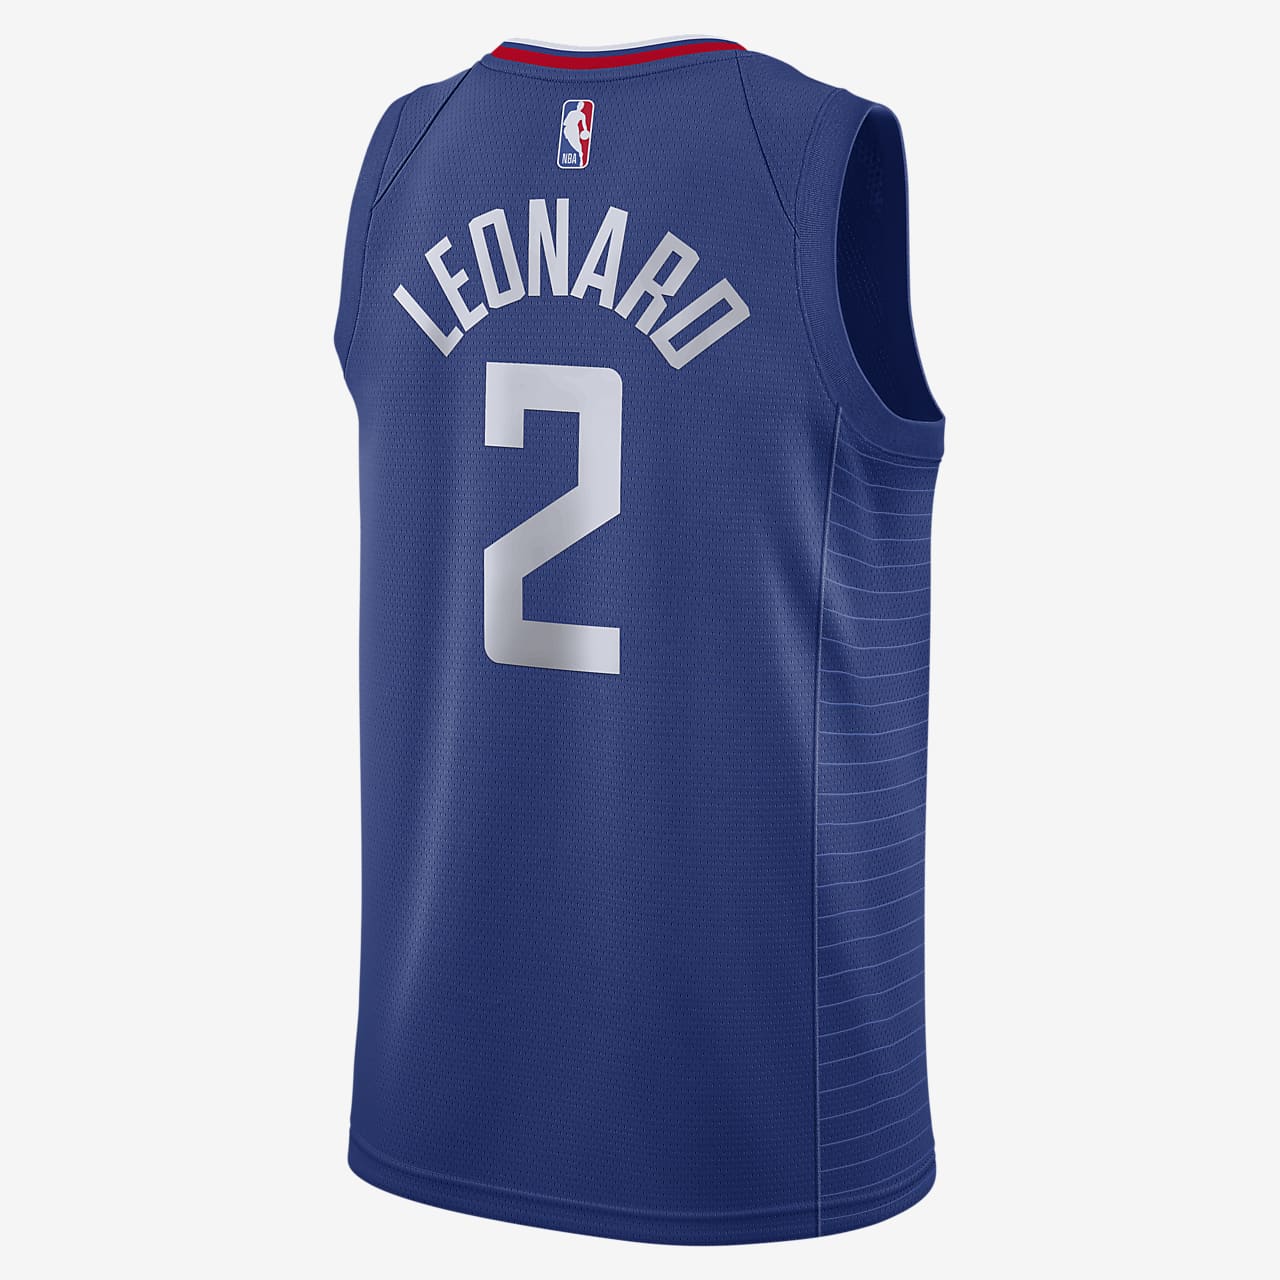 clippers jersey numbers